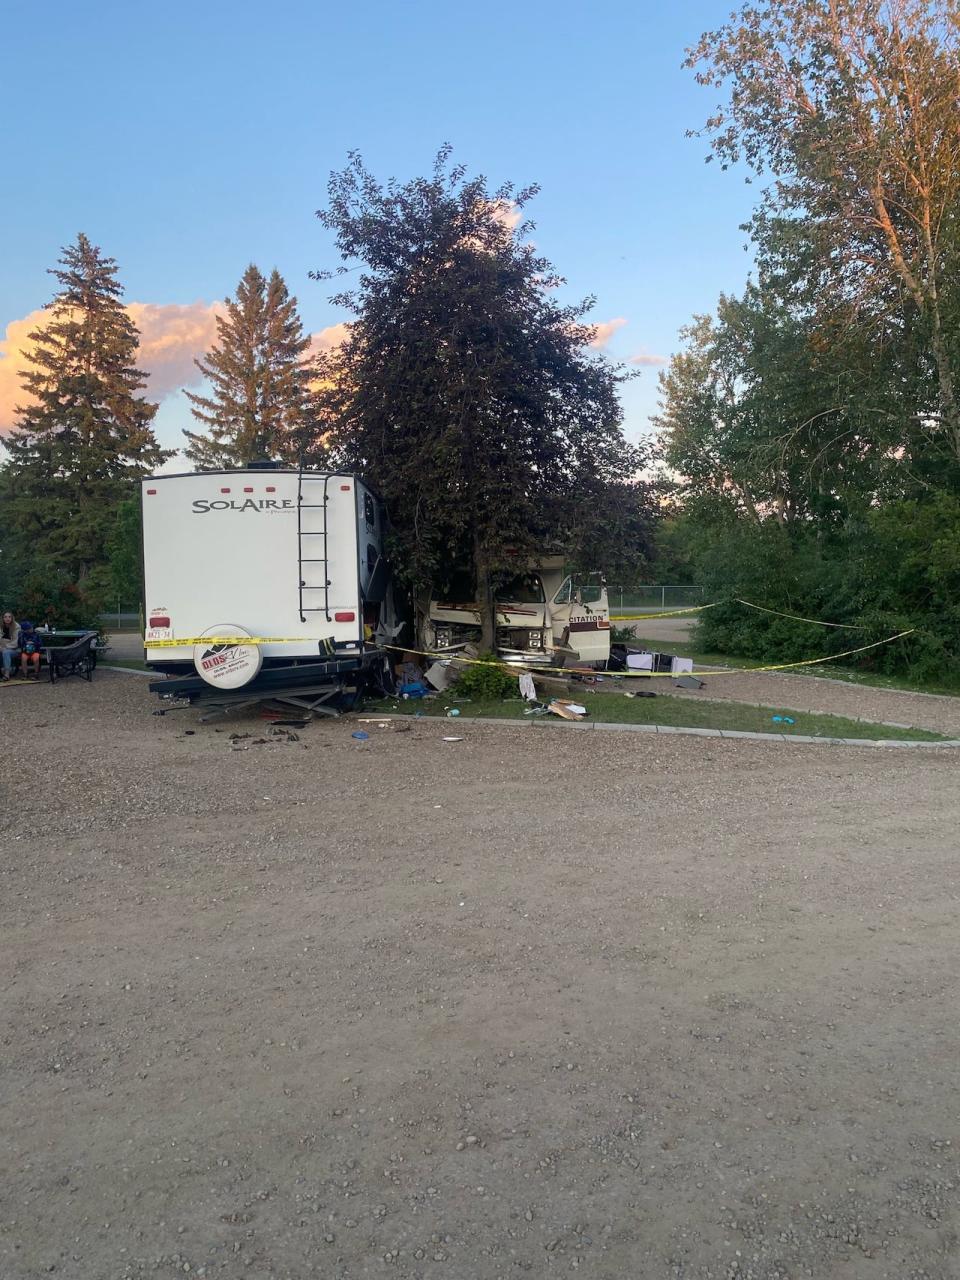 The suspect was not injured, but the collision injured people who were in the RV and others nearby, including the police officer, RCMP said.